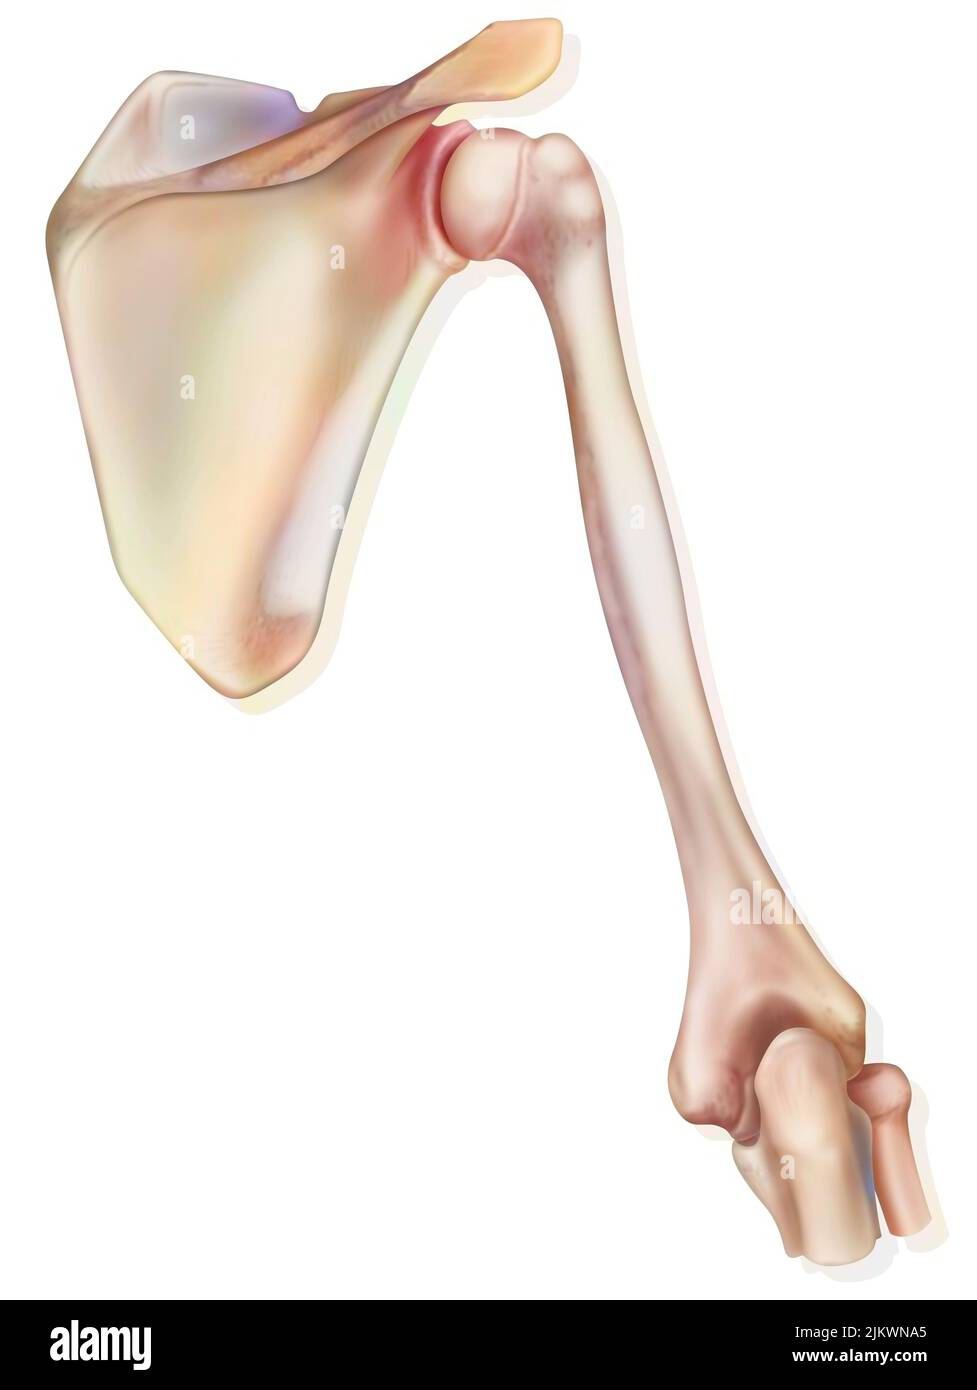 Shoulder and the bones that constitute it: the scapula, the humerus. Stock Photo